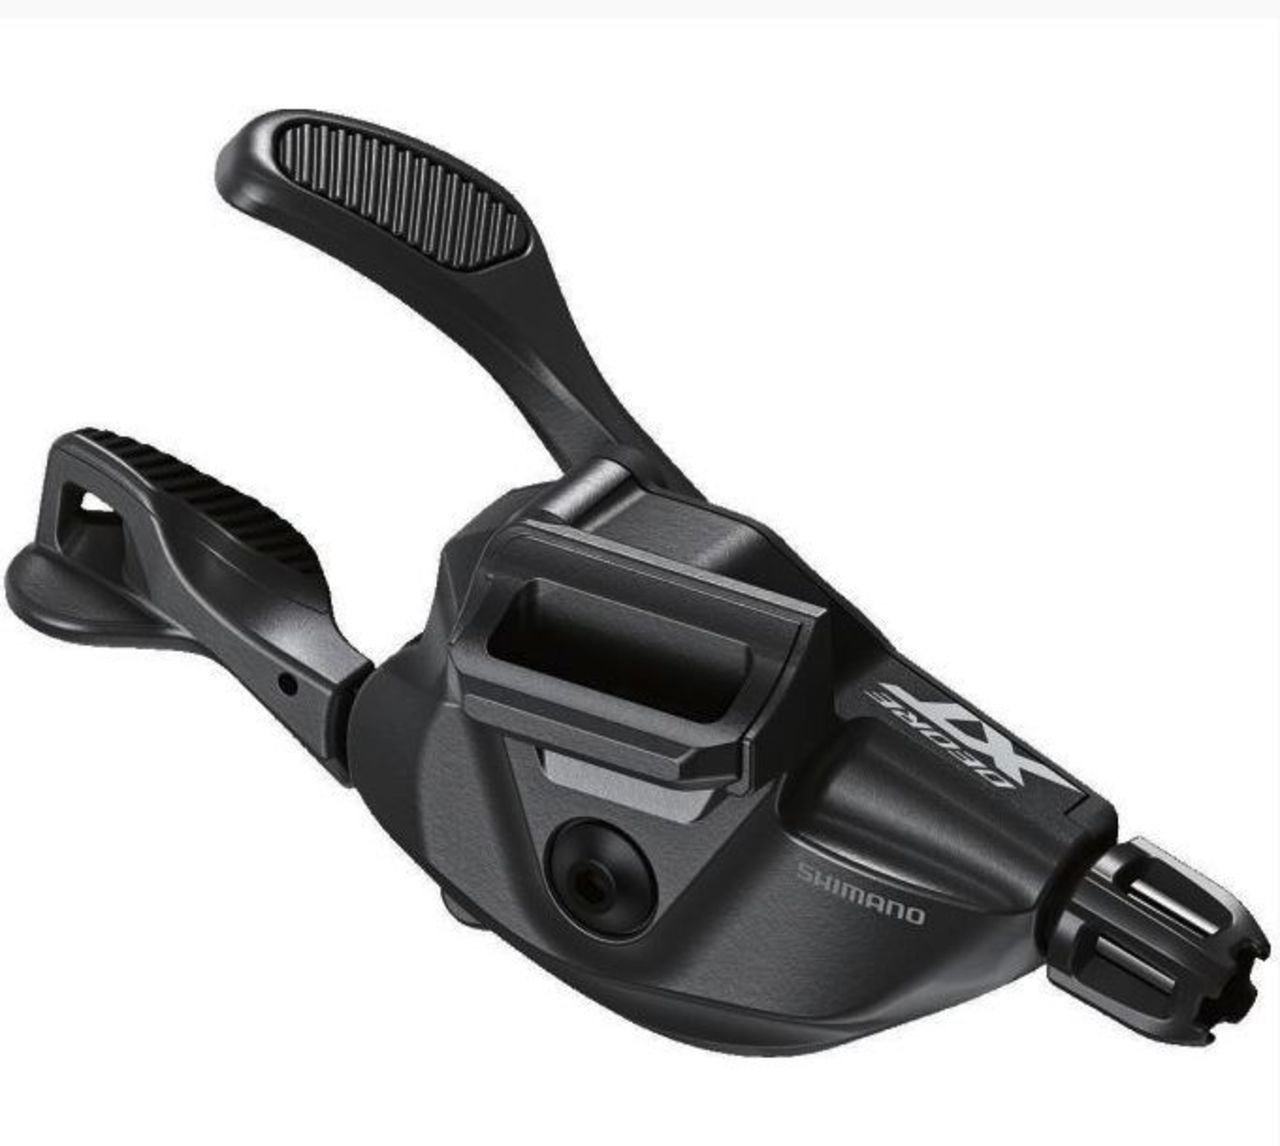 Манетка Shimano DEORE XT, SL-M8130-IR, 11-speed, LinkGlide, I-Spec EV, brake-lever mounting, Rapidfi, A258400 цепь shimano cn m9100 126links for 11 12speed hg 12 speed w quick link ind pack a240252